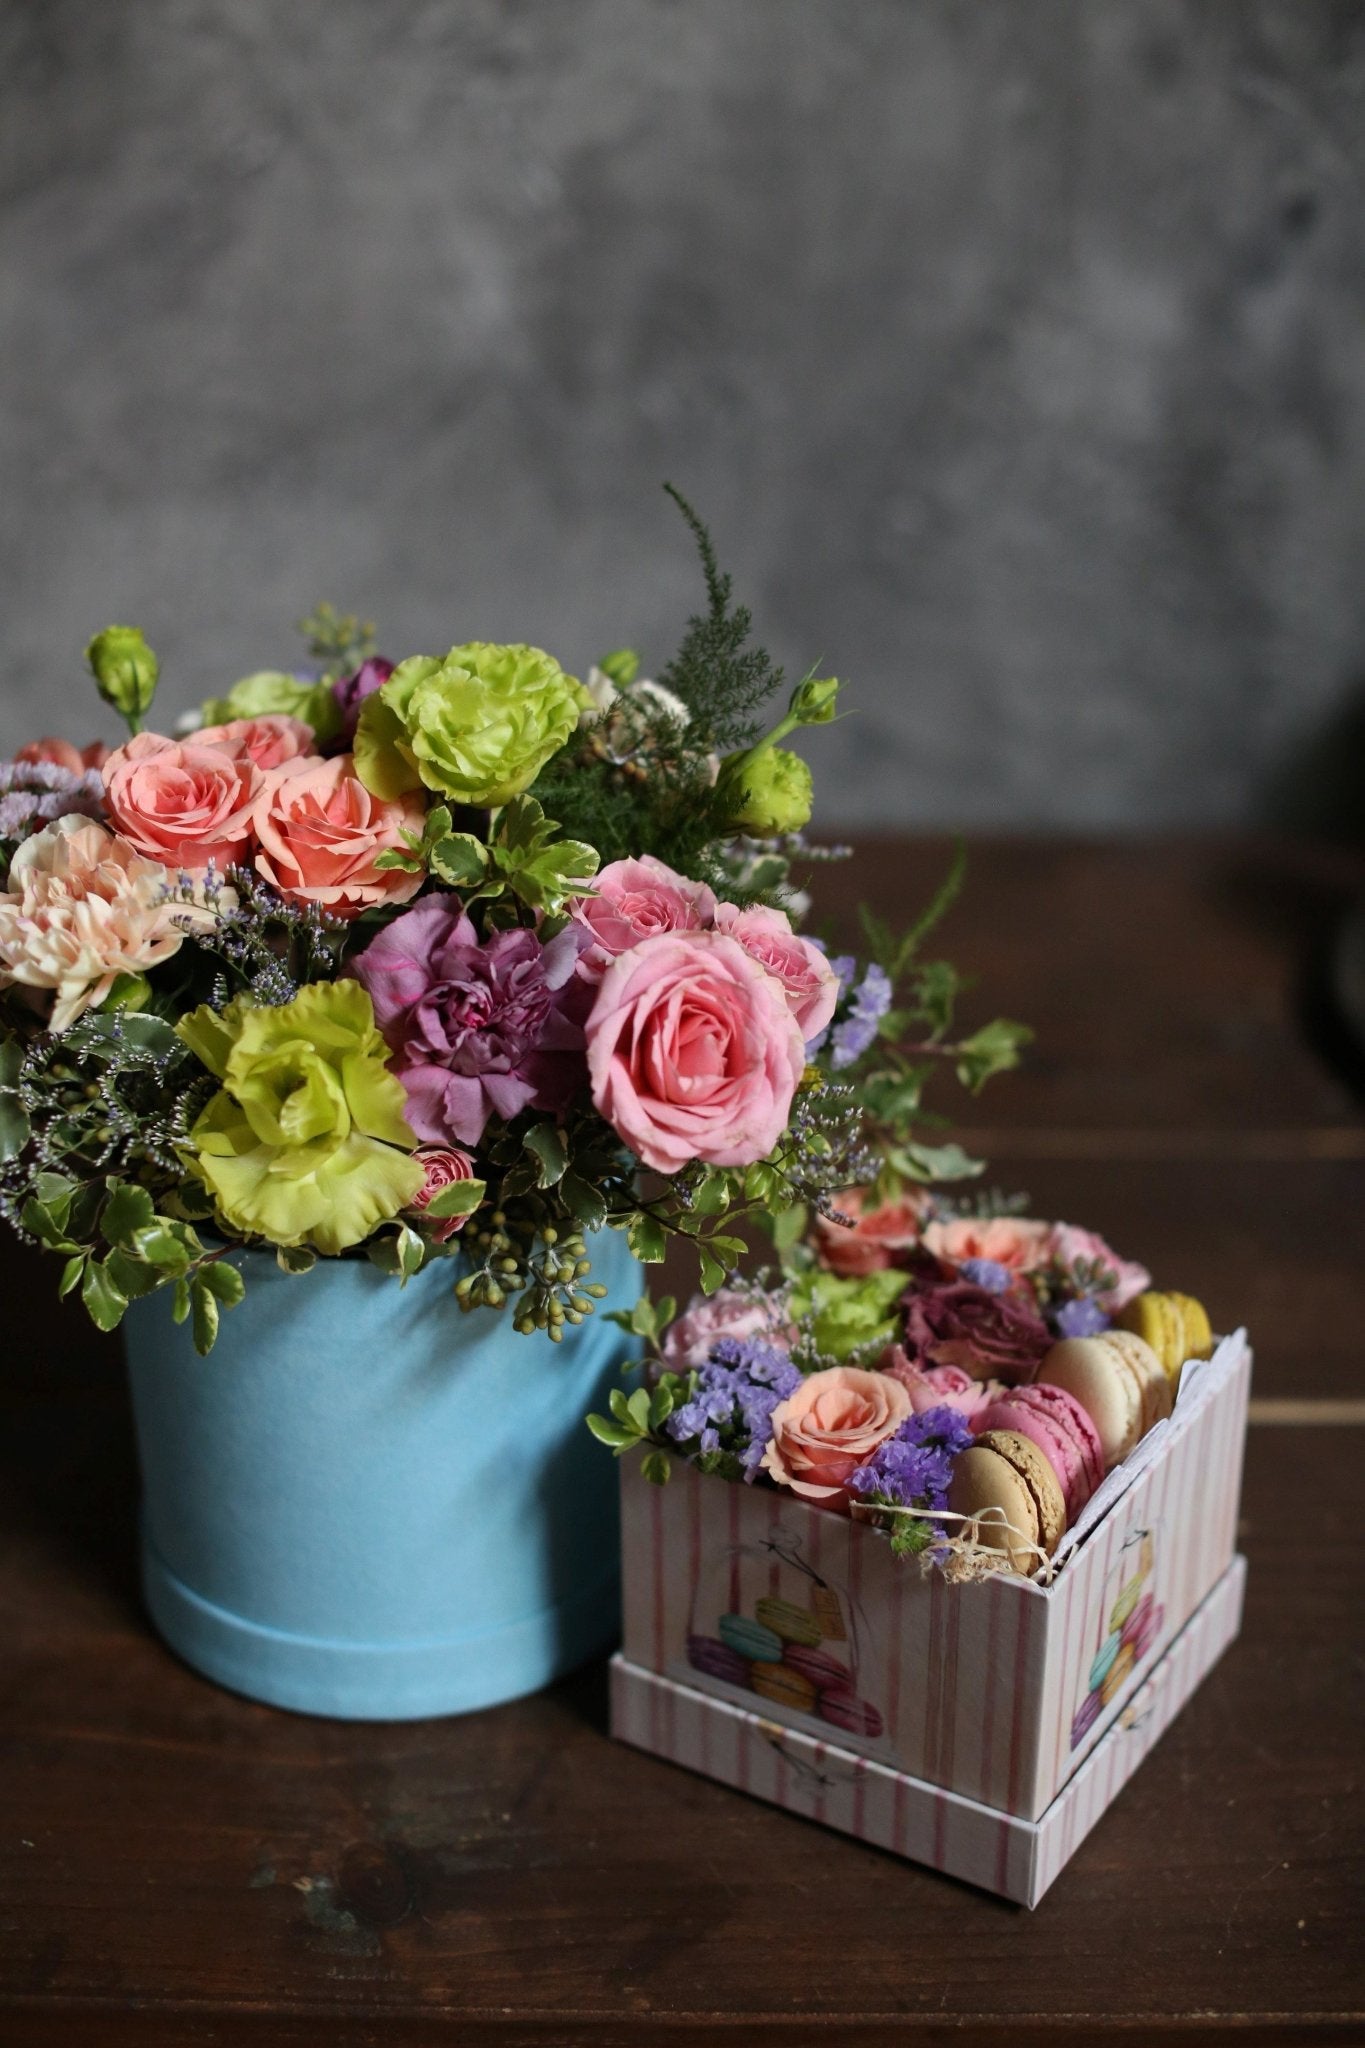 Mother's Day and flowers | Los Angeles Florist - Pink Clover